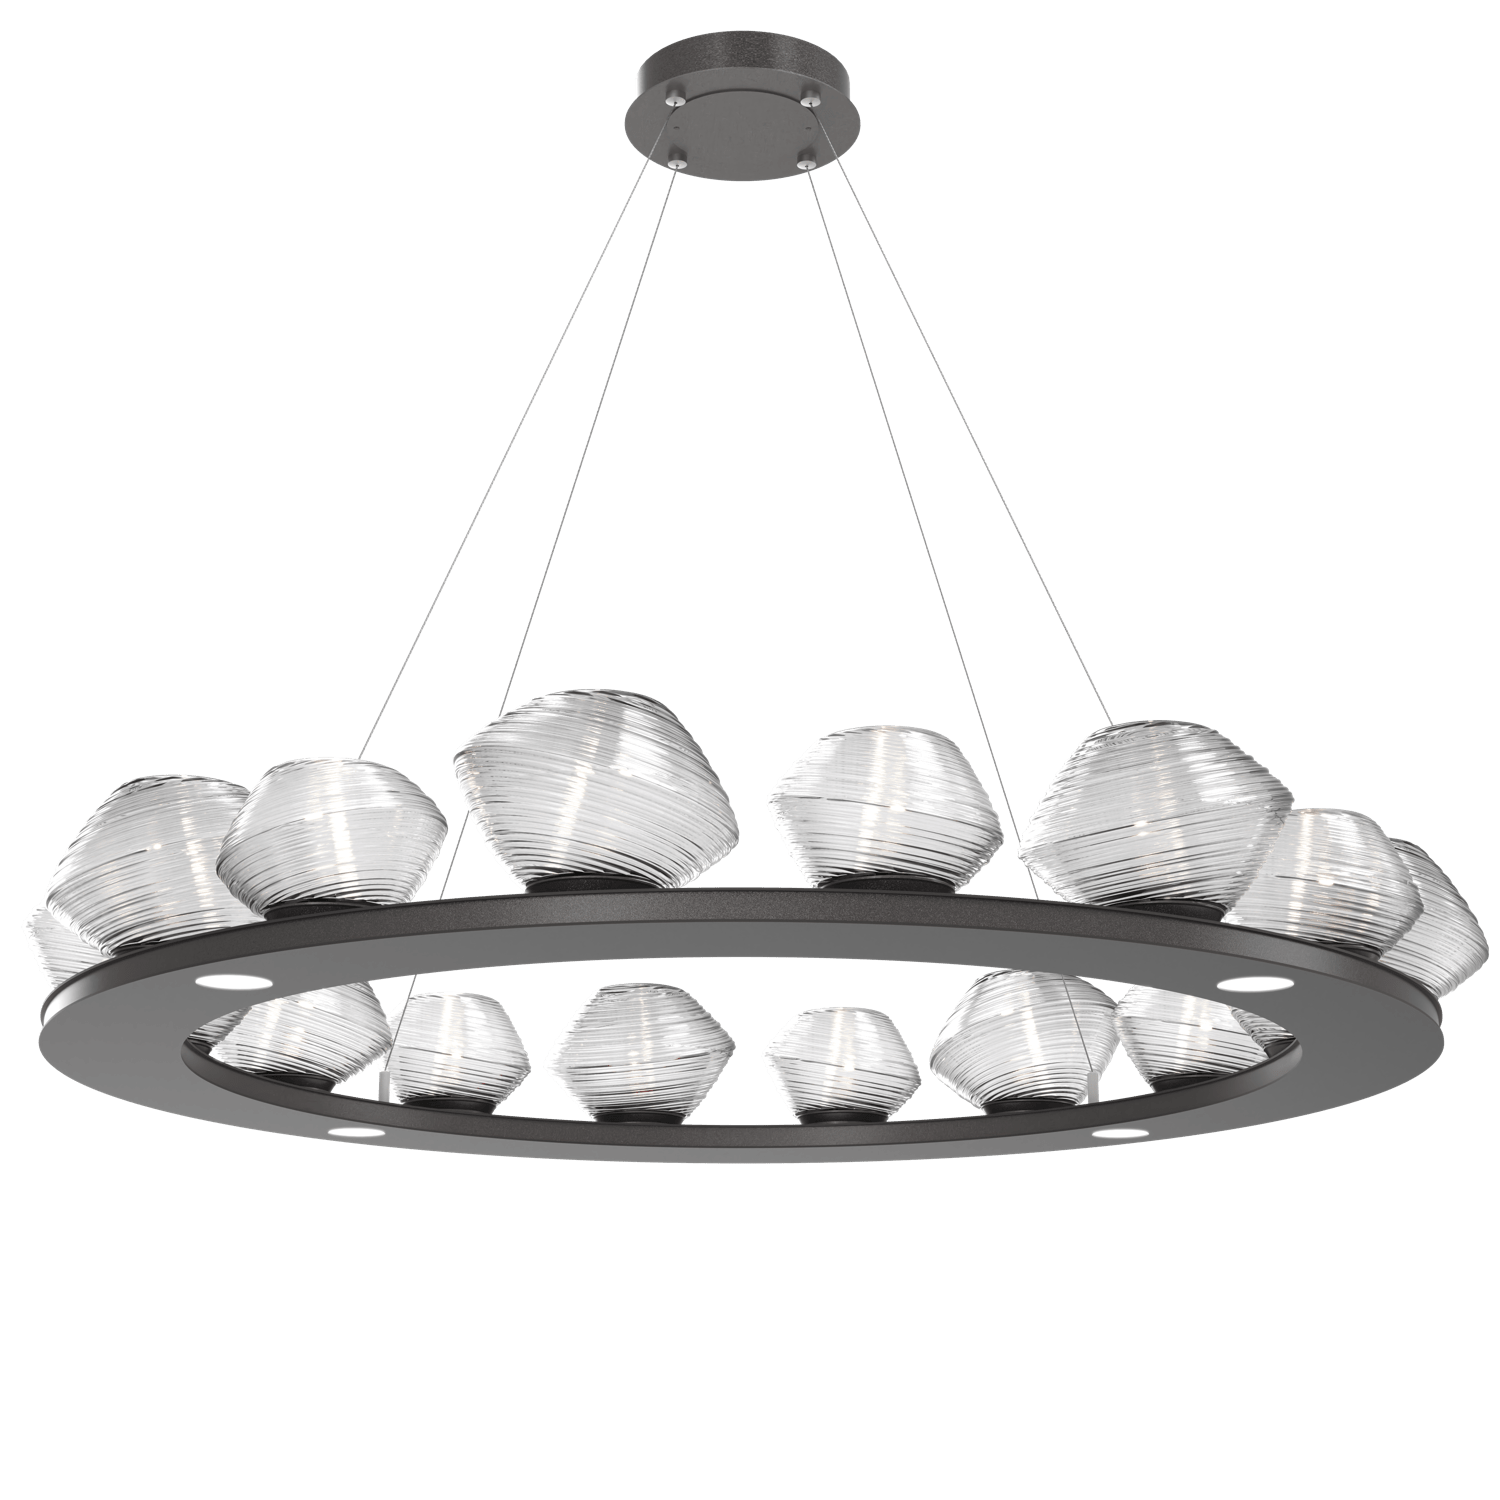 CHB0089-0D-GP-C-Hammerton-Studio-Mesa-48-inch-ring-chandelier-with-graphite-finish-and-clear-blown-glass-shades-and-LED-lamping